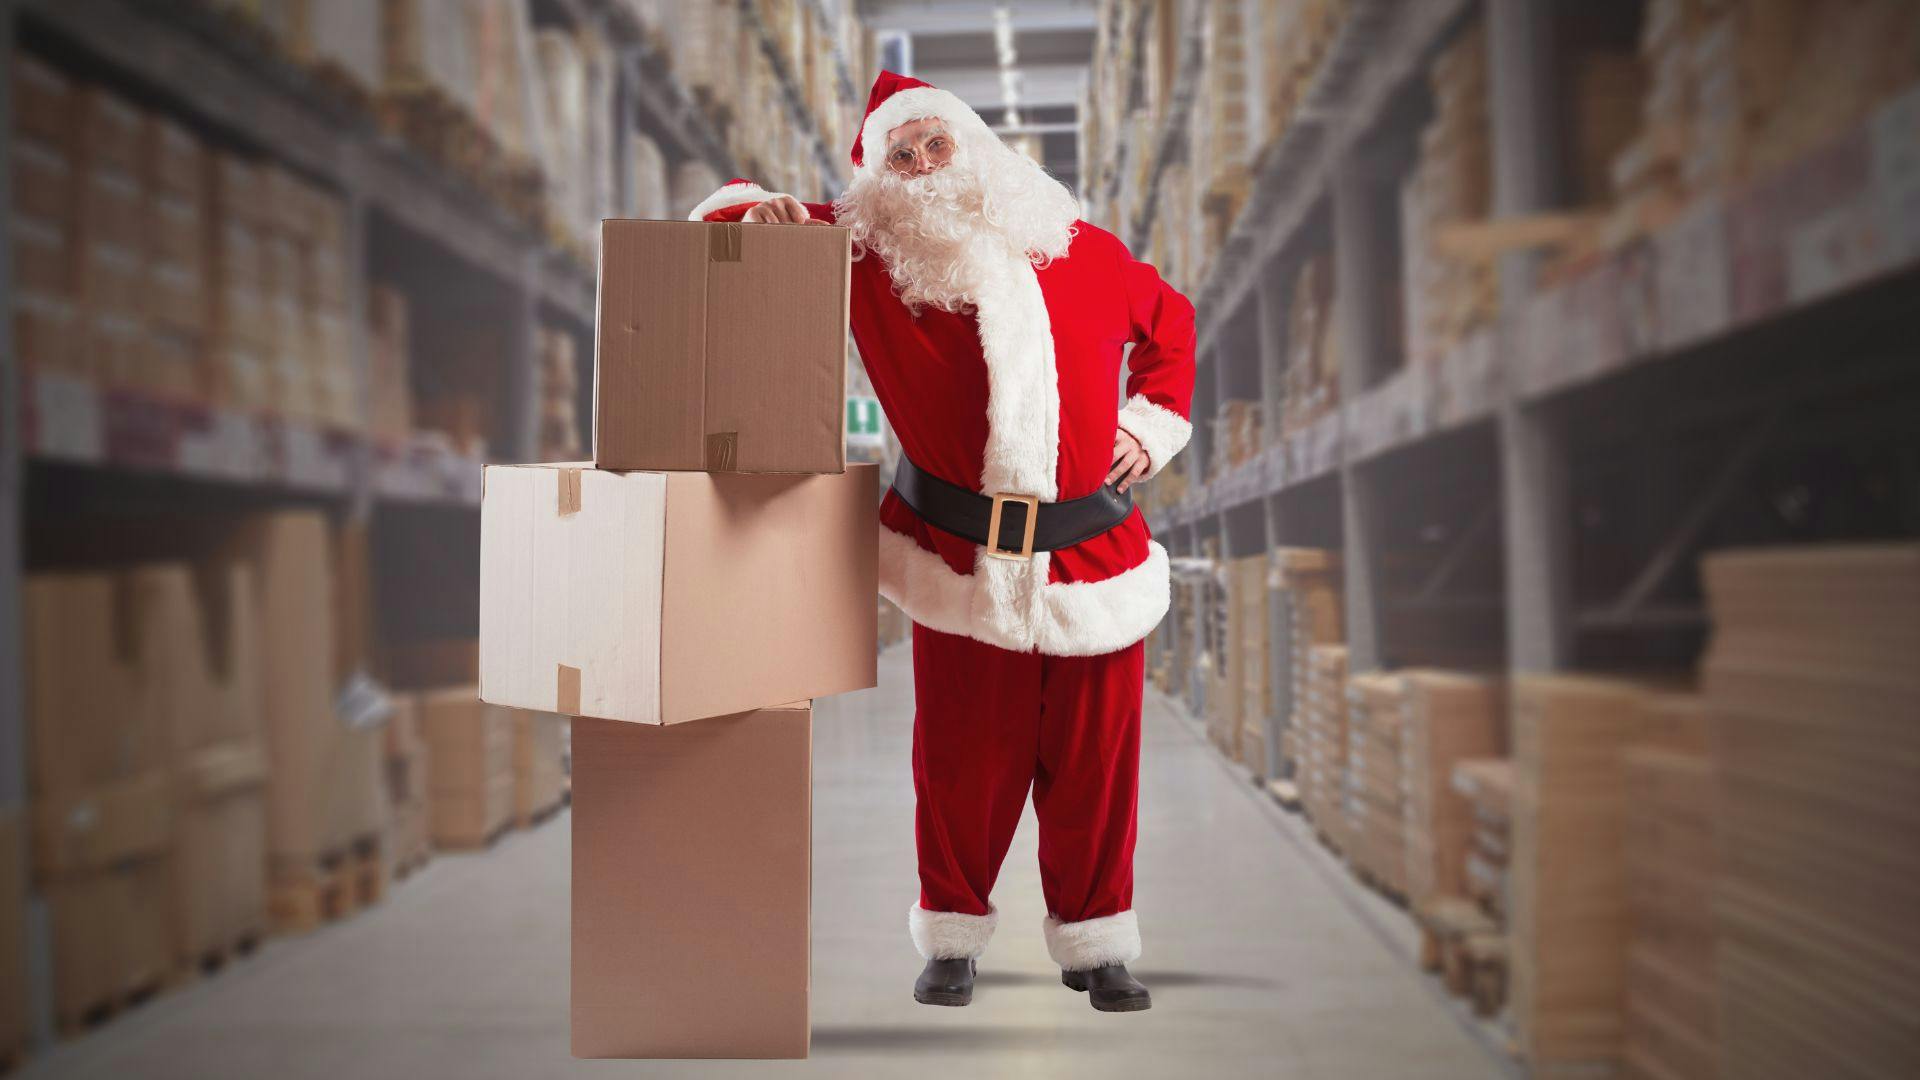 Shop now, ship with Santa! Ship to UK from the US easily.